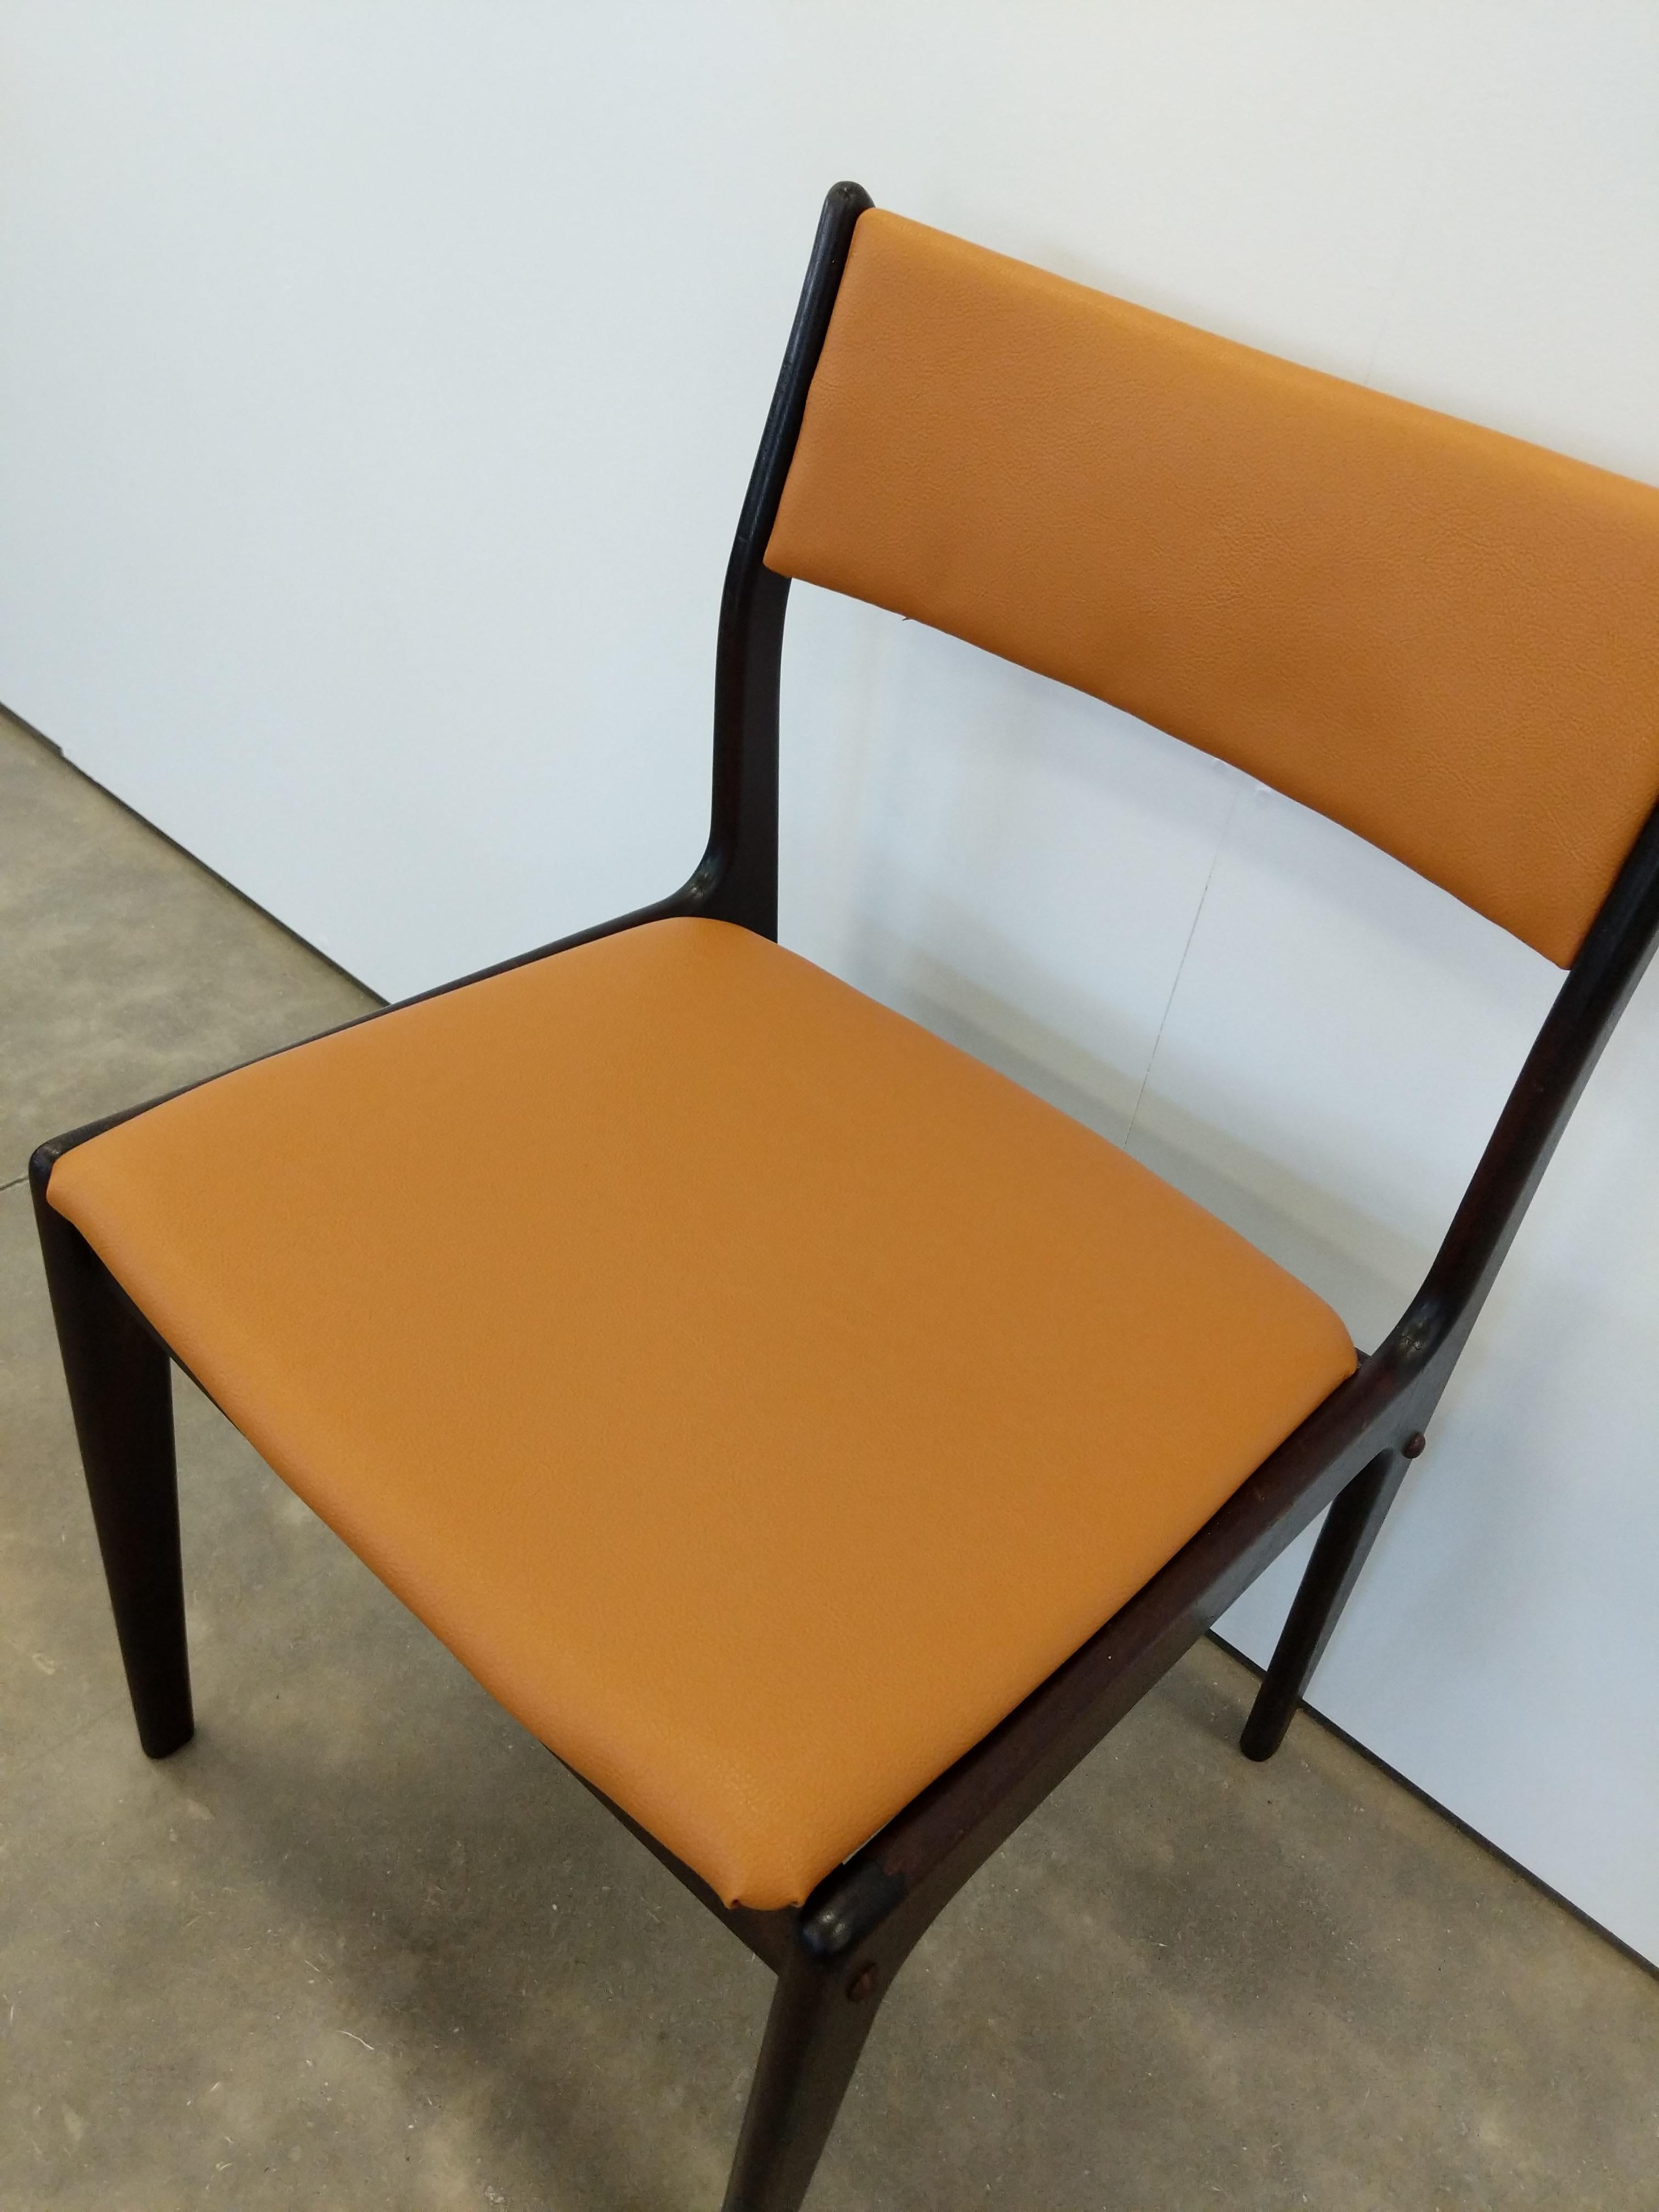 Wood Vintage Danish Mid Century Modern Dining Chair For Sale